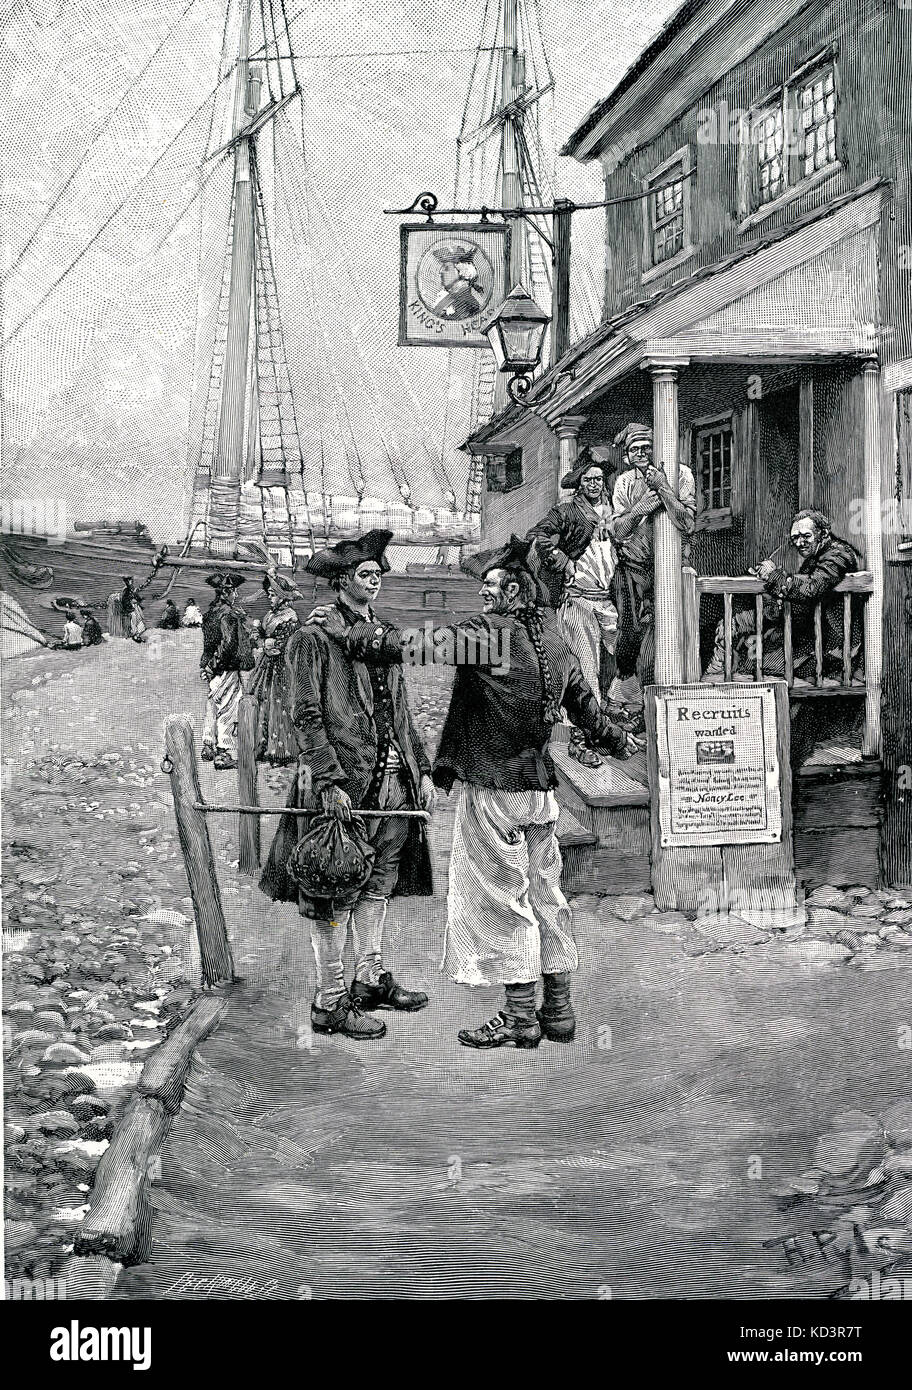 King's Head Tavern, Brownejohn's Wharf, New York, set up as a recruiting station for the British army during American Revolution, 1765 - 1783. Illustration by Howard Pyle, 1908 Stock Photo